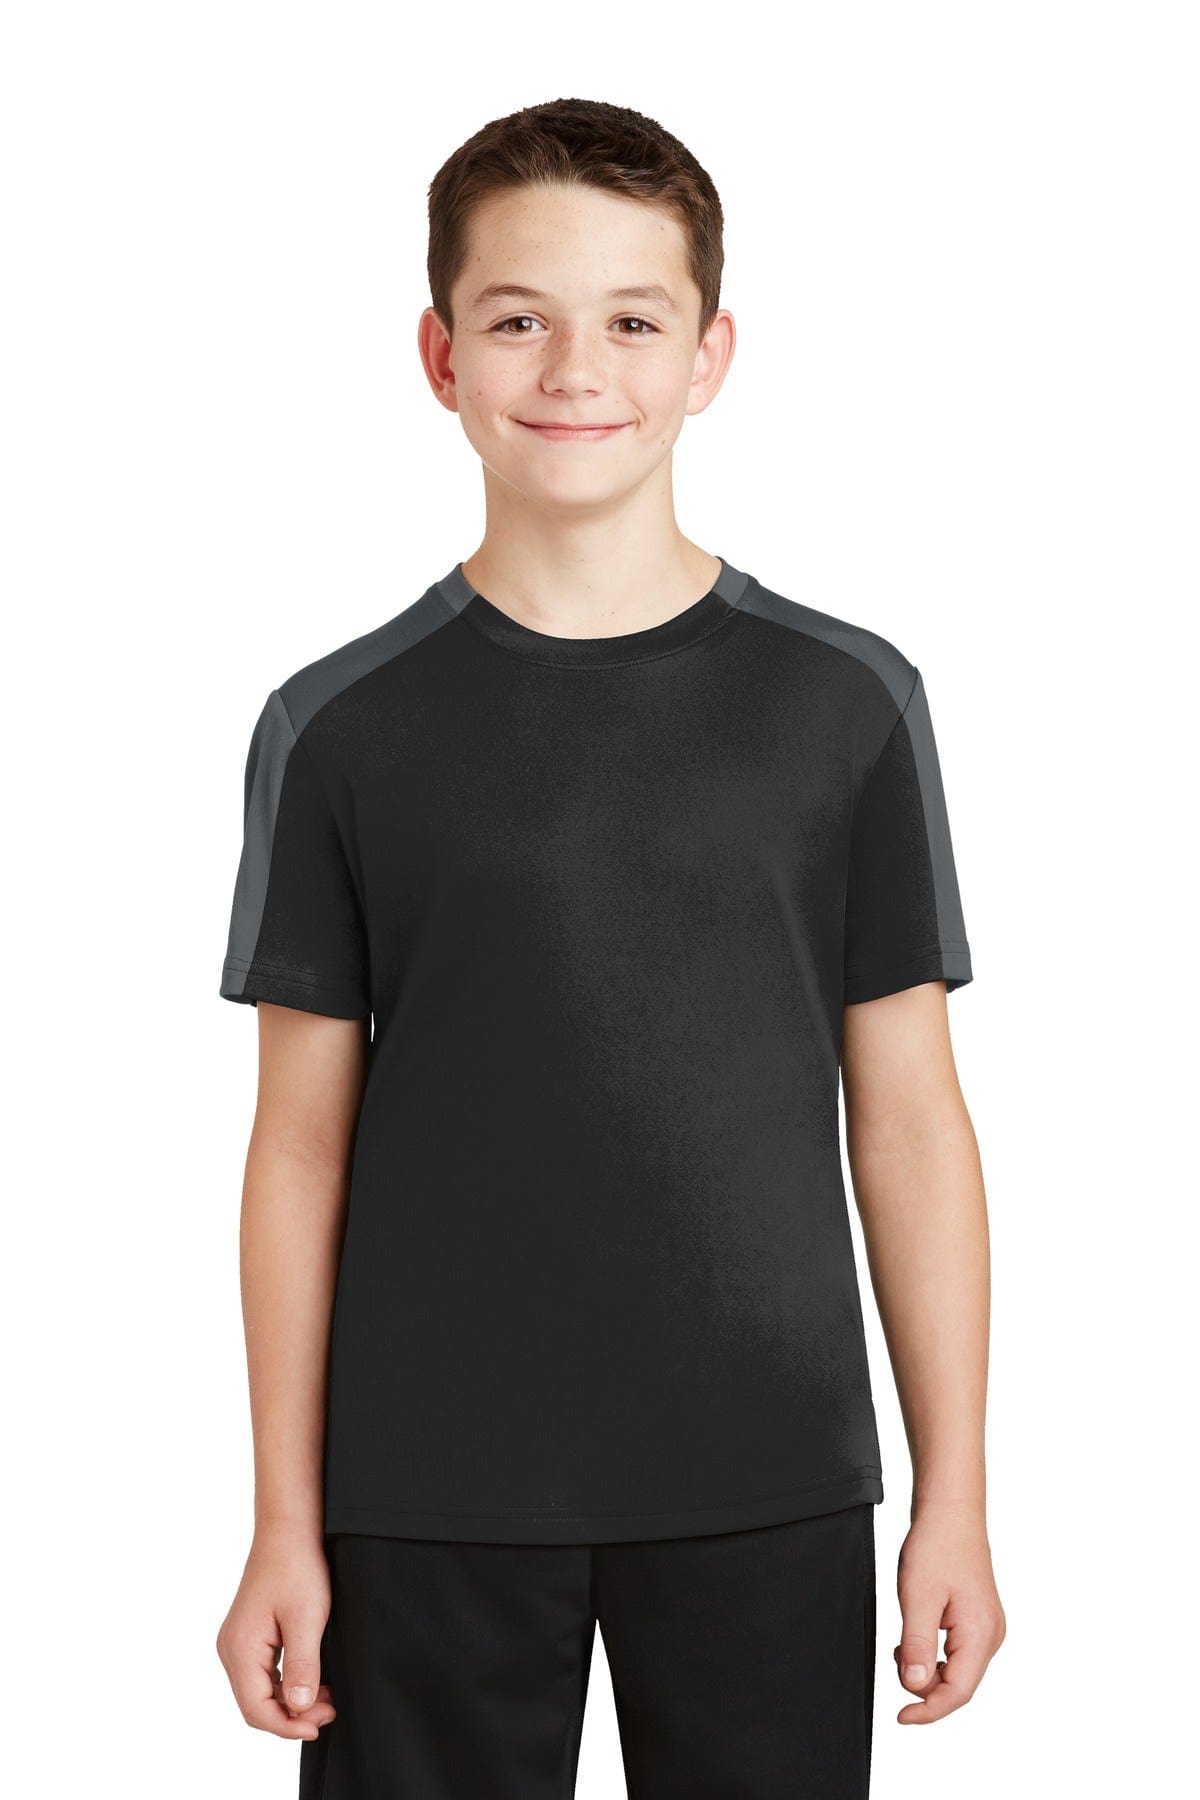 DISCONTINUED Sport-Tek ® Youth PosiCharge ® Competitor ™ Sleeve-Blocked Tee. YST354